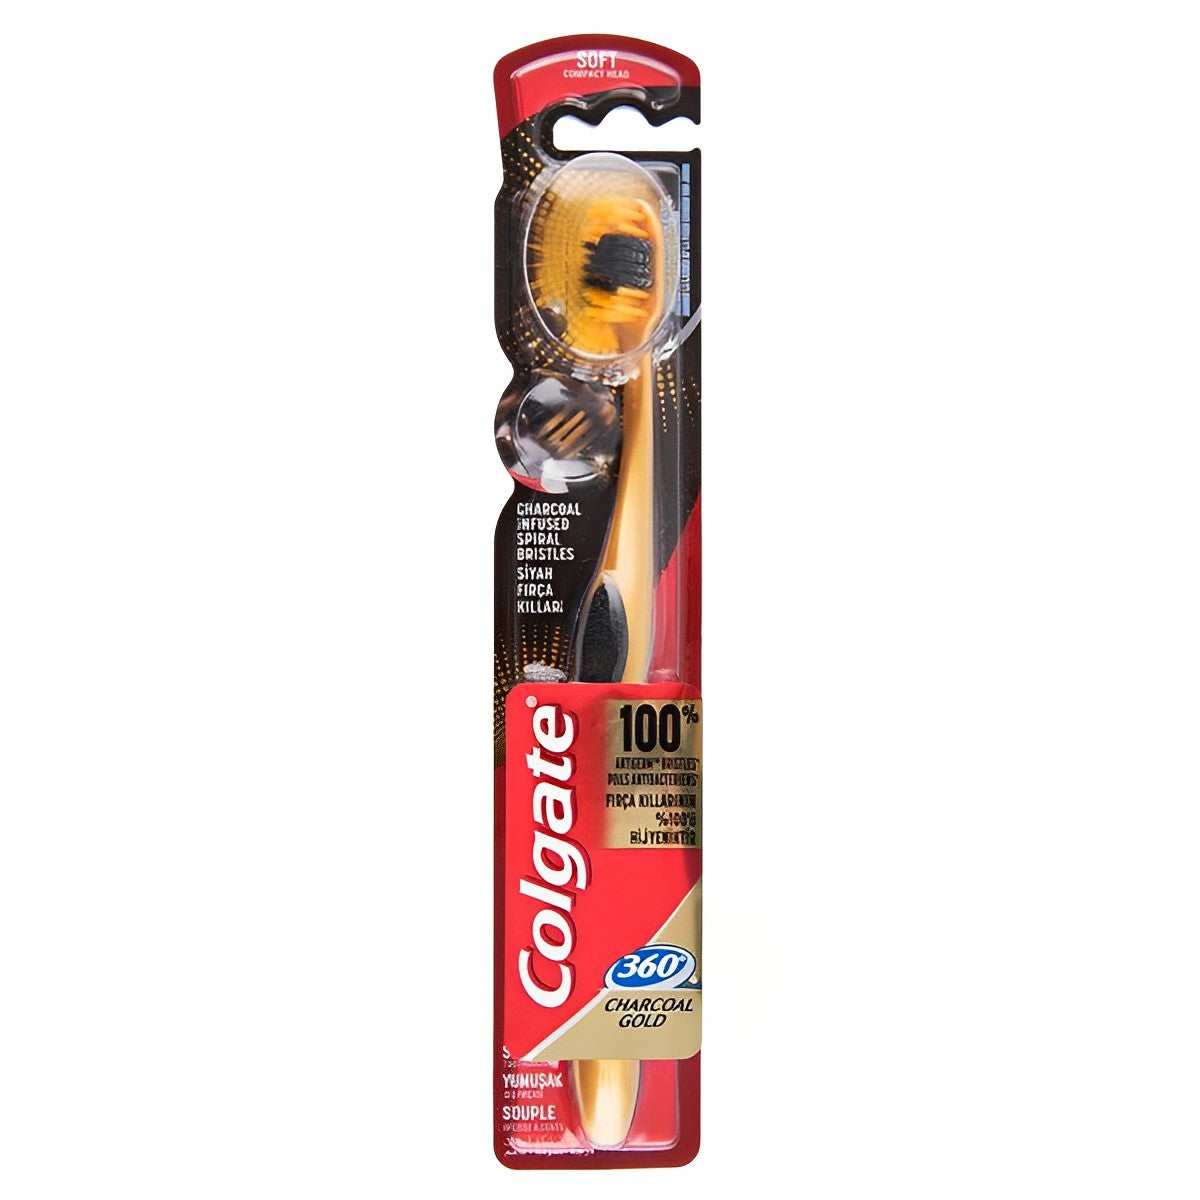 Colgate - 360 Degrees Charcoal Gold Toothbrush - 1pcs - Continental Food Store